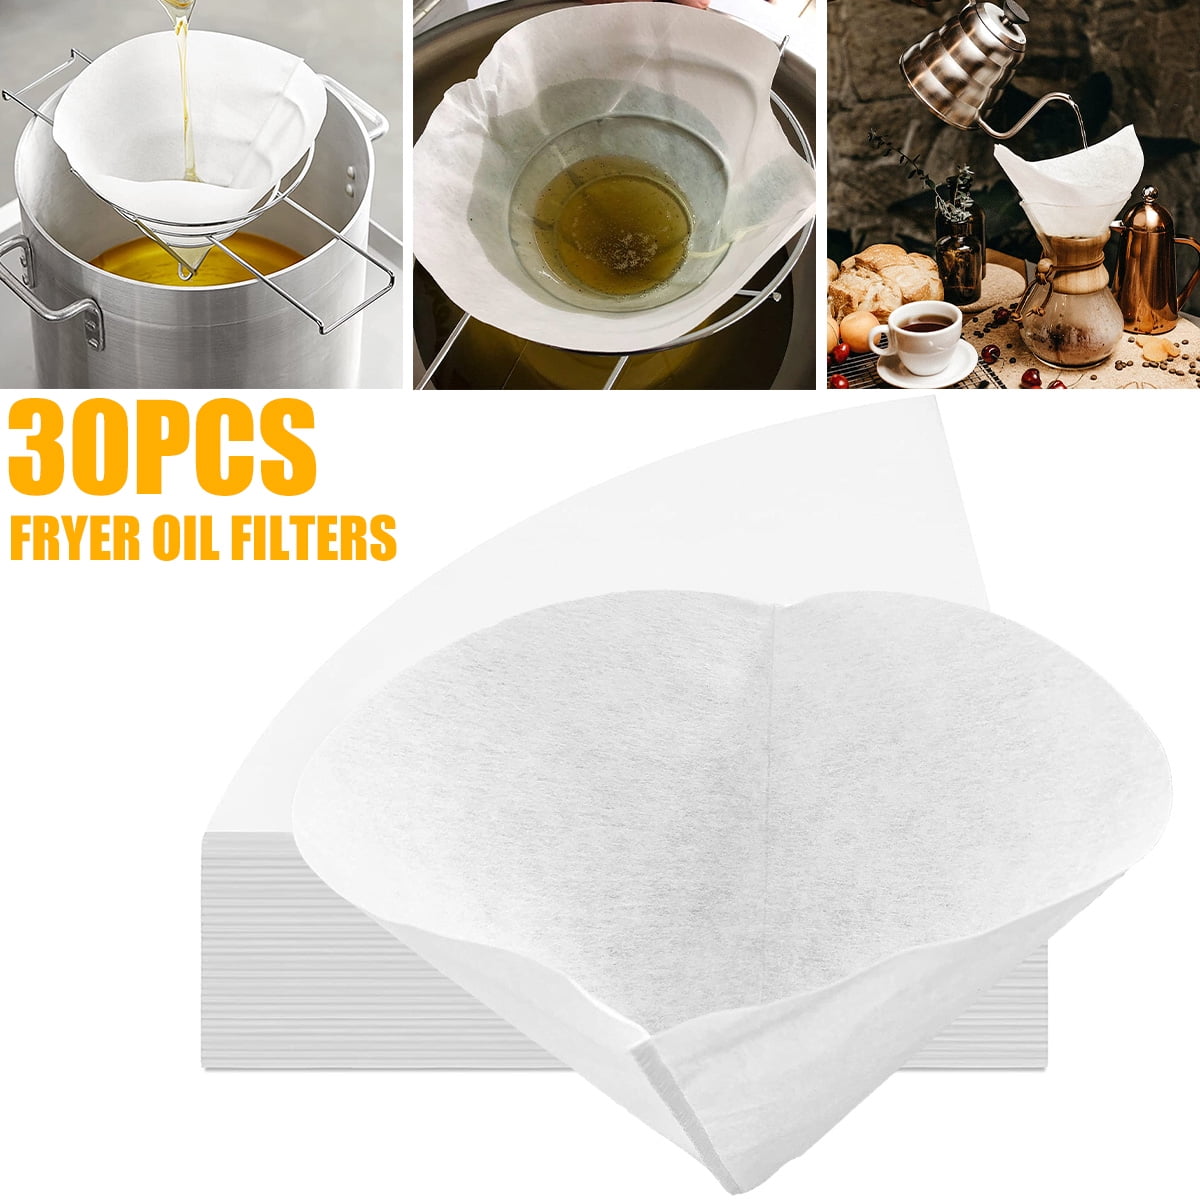 AYUSEB 30 Pack 10 Deep Fryer Oil Filters, Best Non Woven Cooking Oil  Strainer, Premium Maple Syrup Filter Set, Cones Commercial Filter for